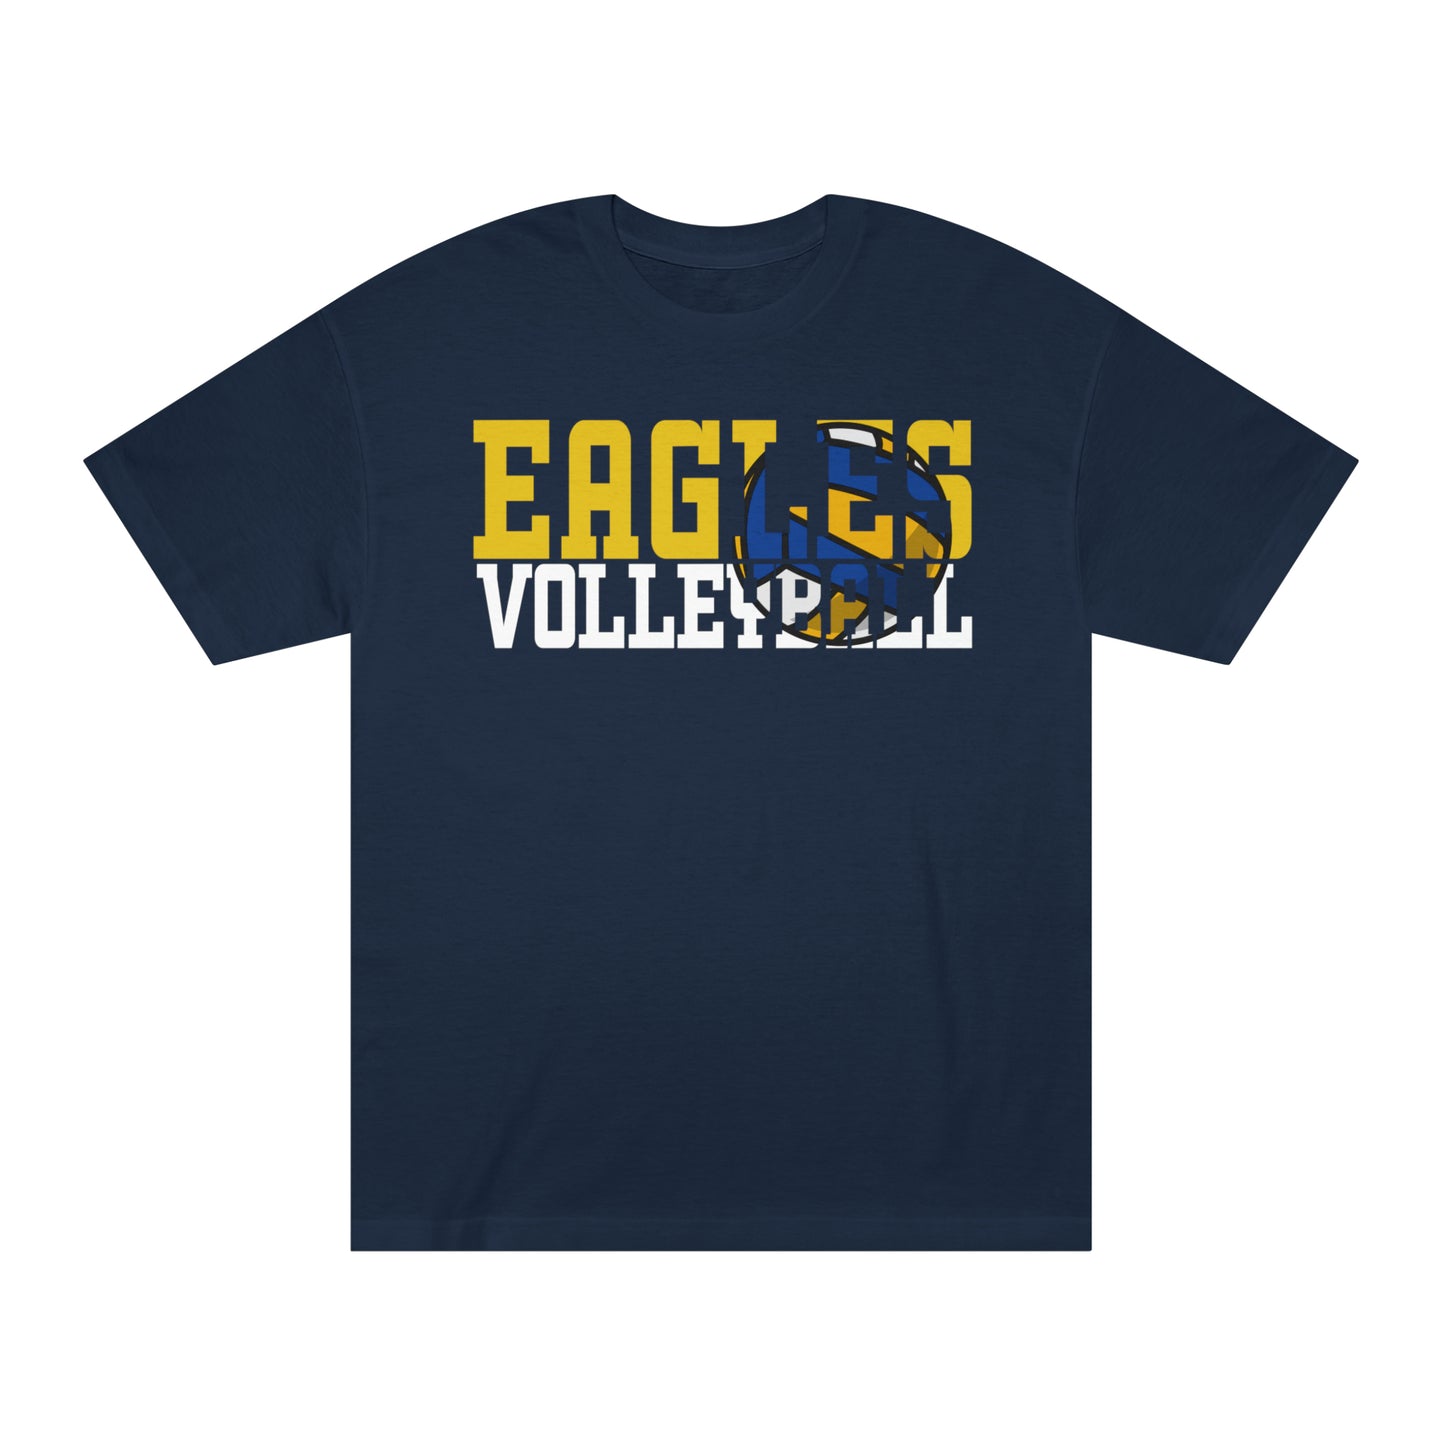 Volleyball Cutout - American Apparel Unisex Classic Tee